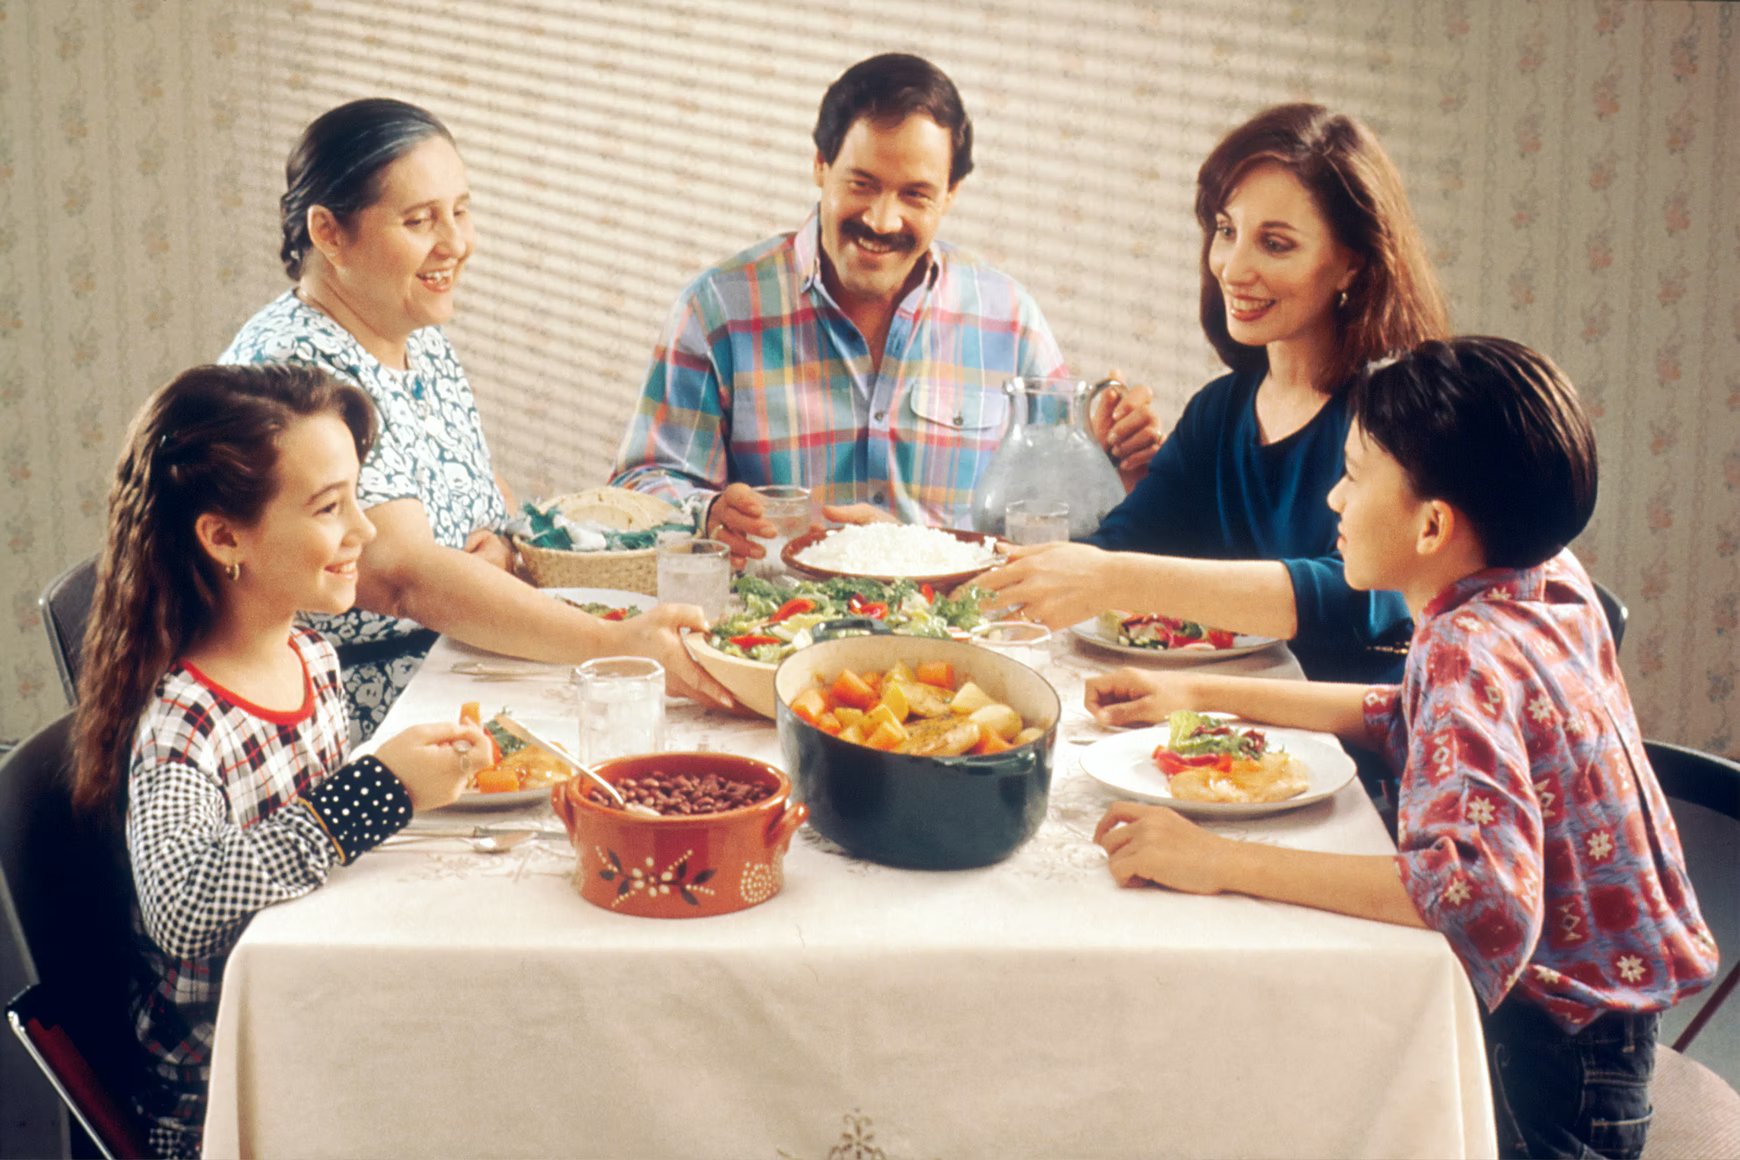 Eating dinner at the dinner table. Honor your mother and father by spending time with them